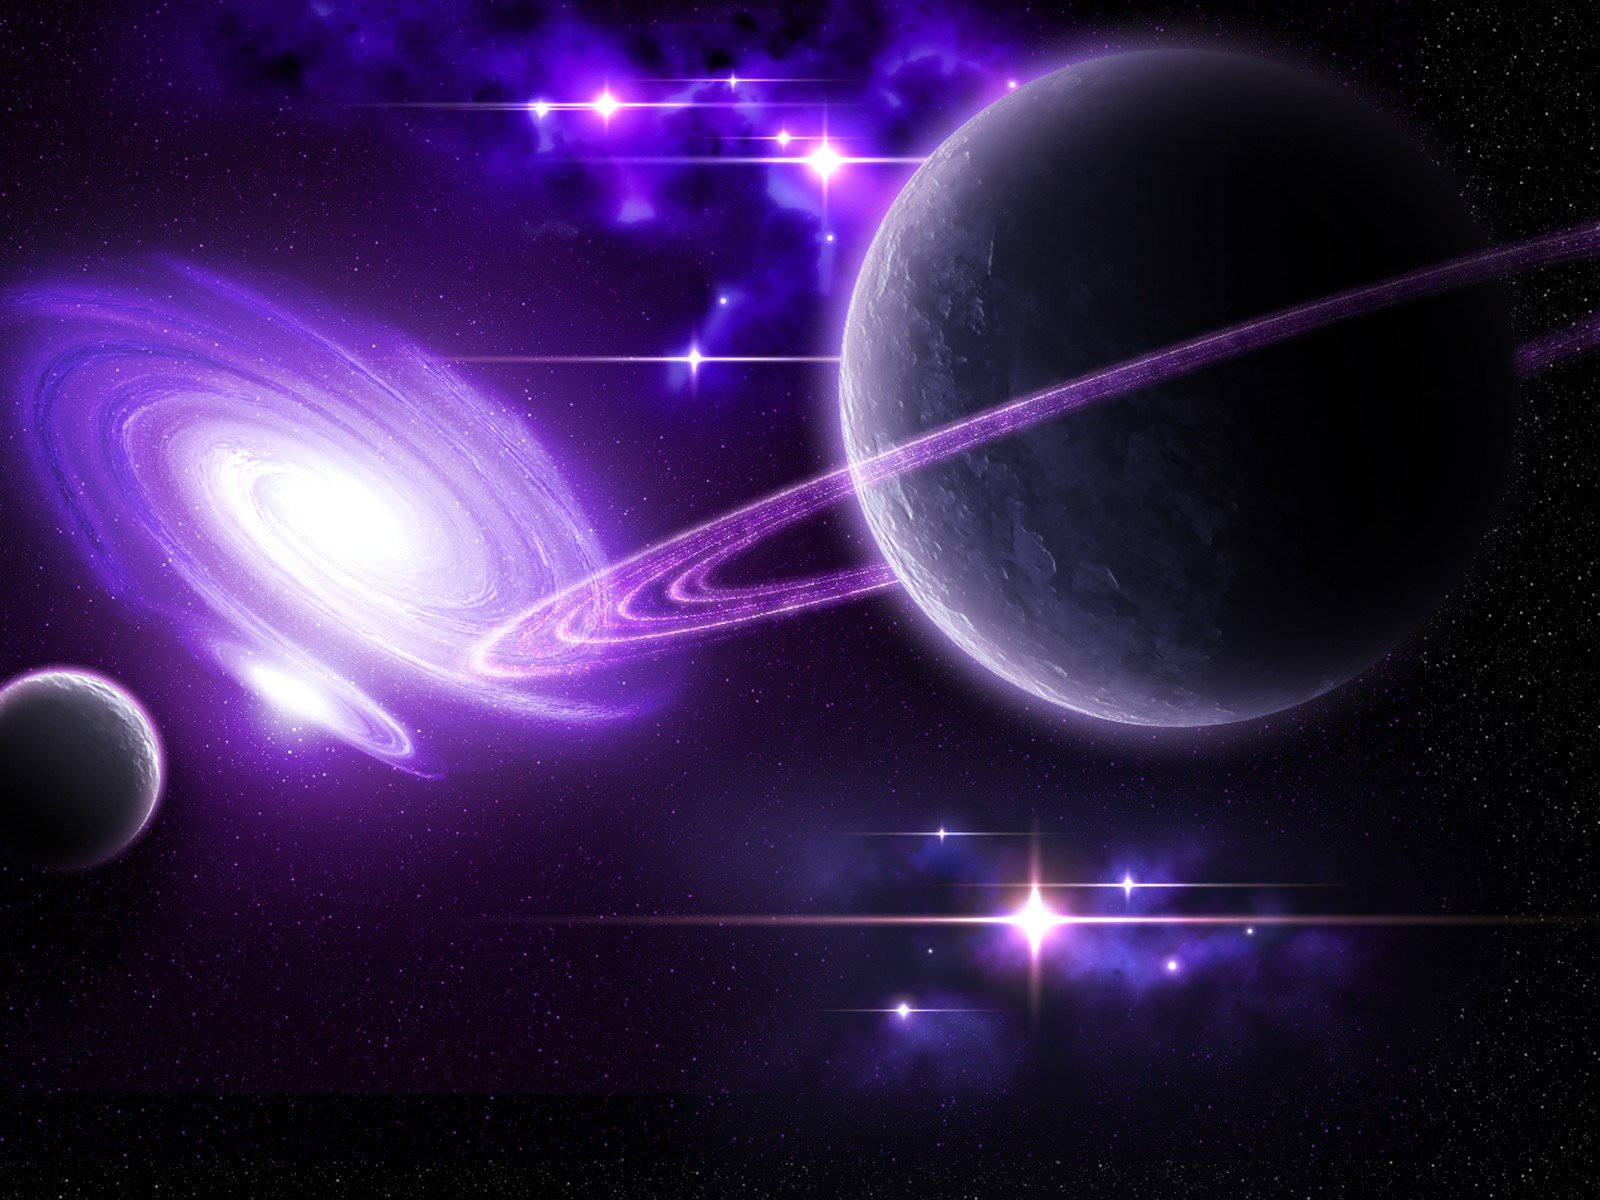 light, Outer, Space, Stars, Galaxies, Planets, Purple, Rings, Bright Wallpaper